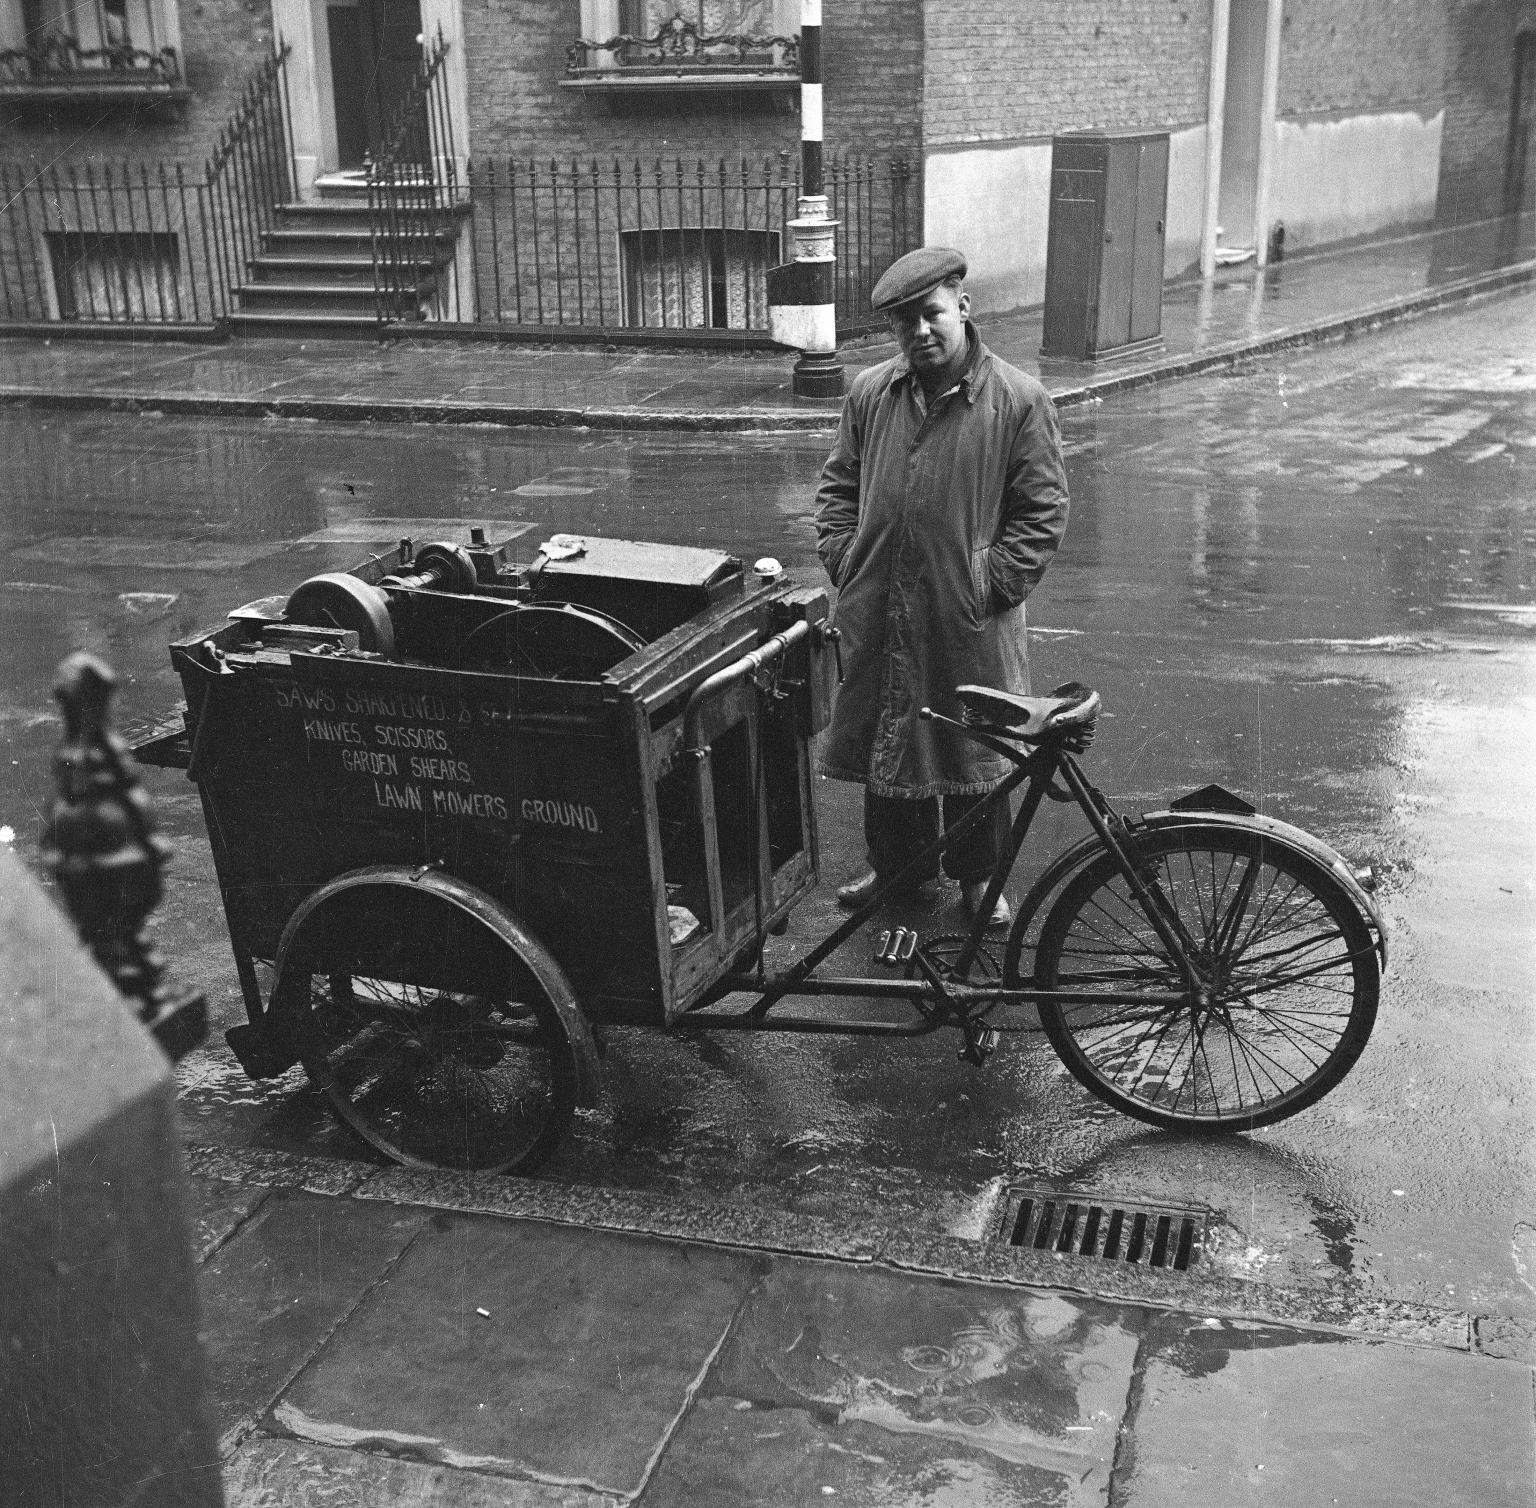 Photograph showing a knife grinder sharpening a knife on his cart', Nigel  Henderson, [c.1949–c.1956]', Nigel Henderson, [c.1949–c.1956] – Tate  Archive